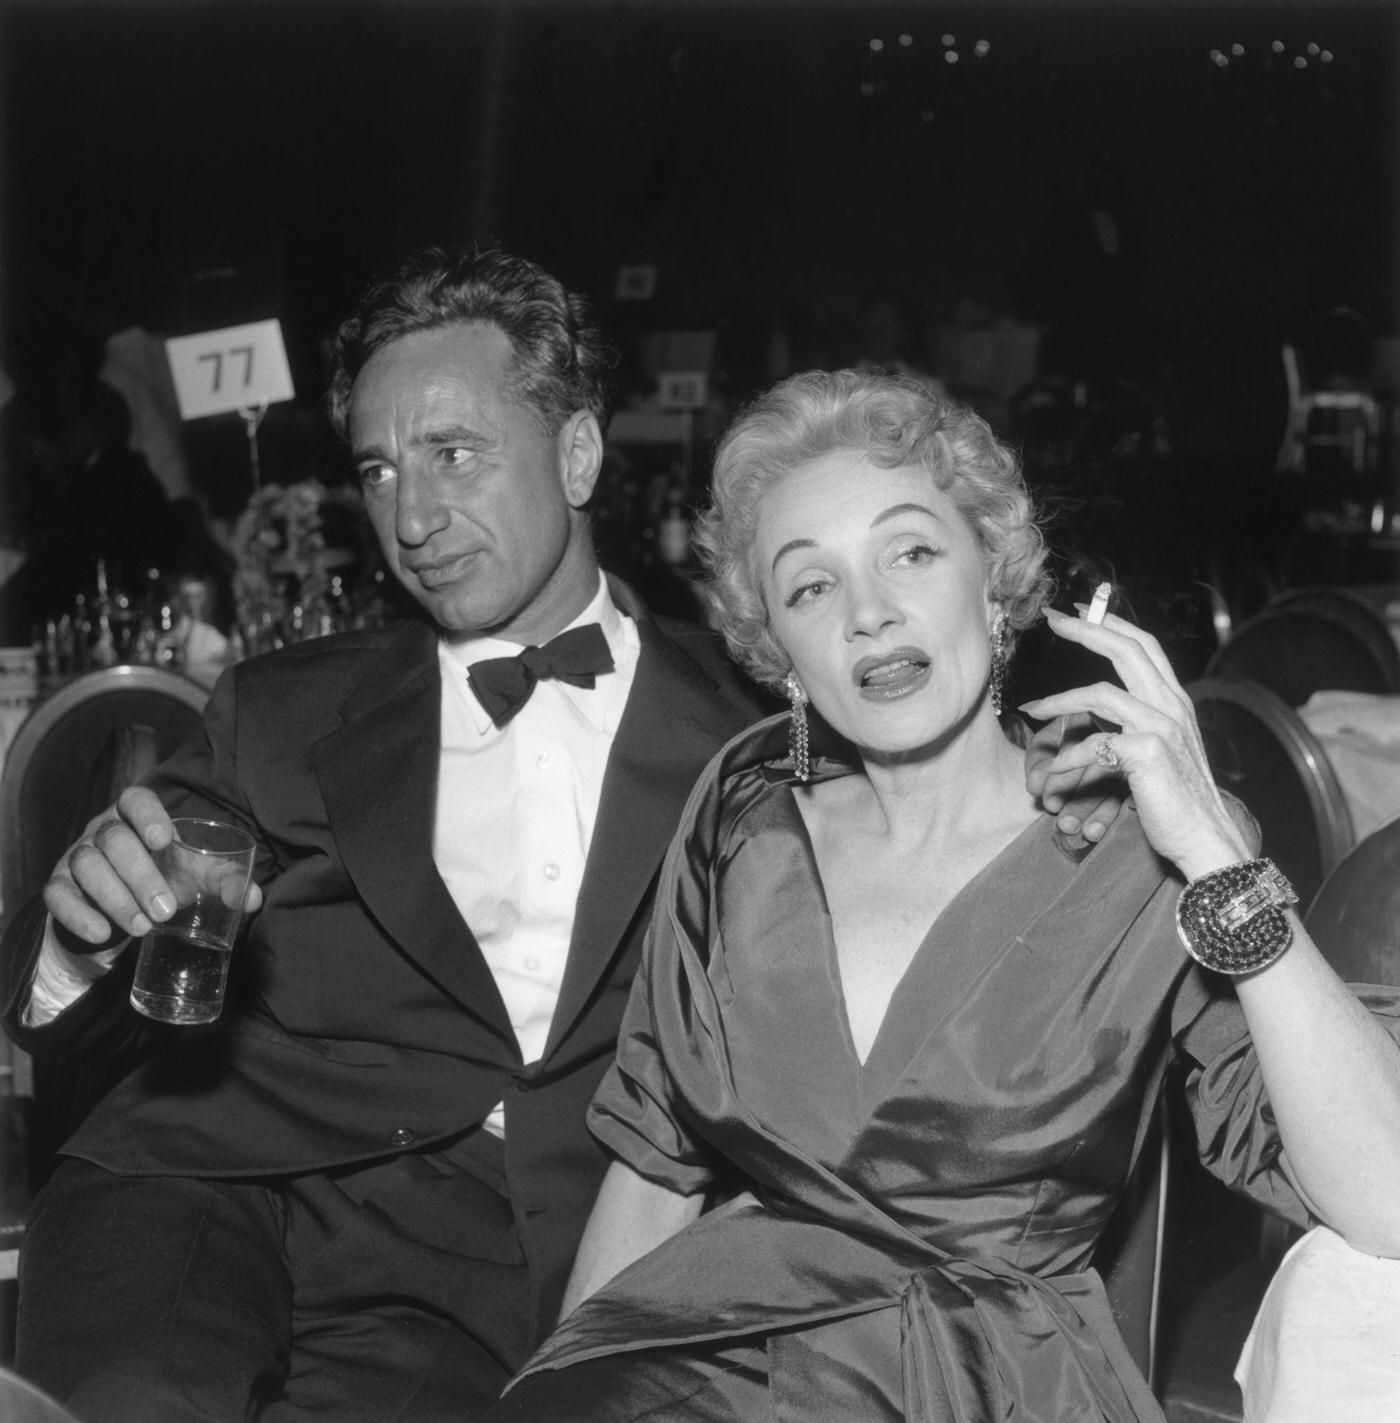 Elia Kazan and Marlene Dietrich sit together at the premiere reception for director George Cukor's film 'A Star is Born' in the 1950s.